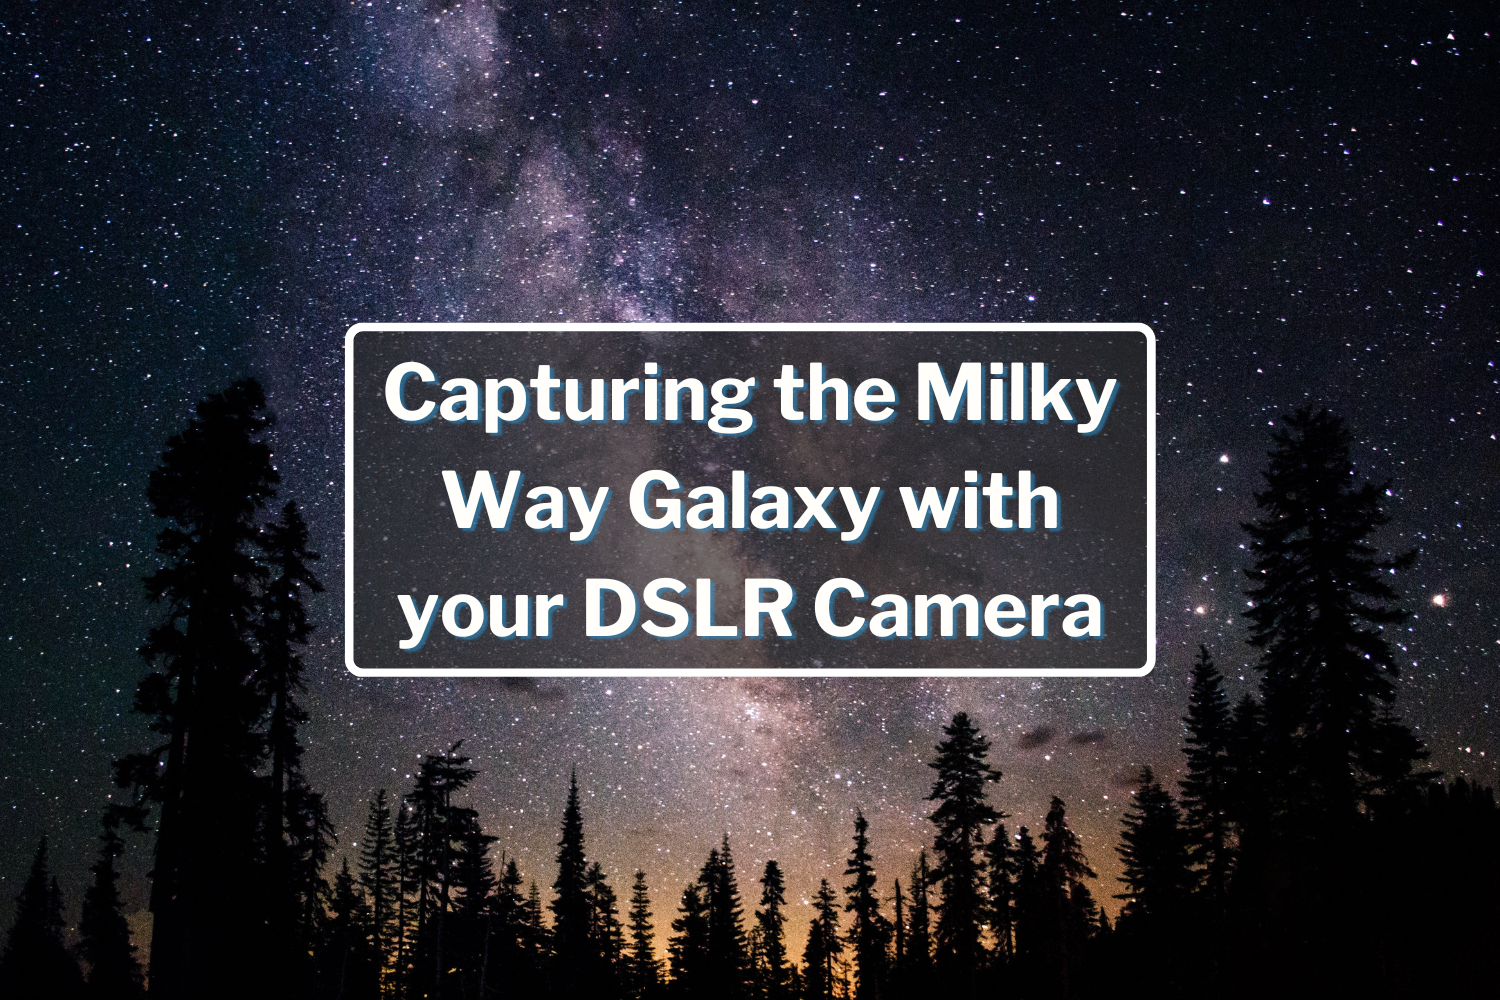 Milky Way Photography - How to image the Milky Way Galaxy